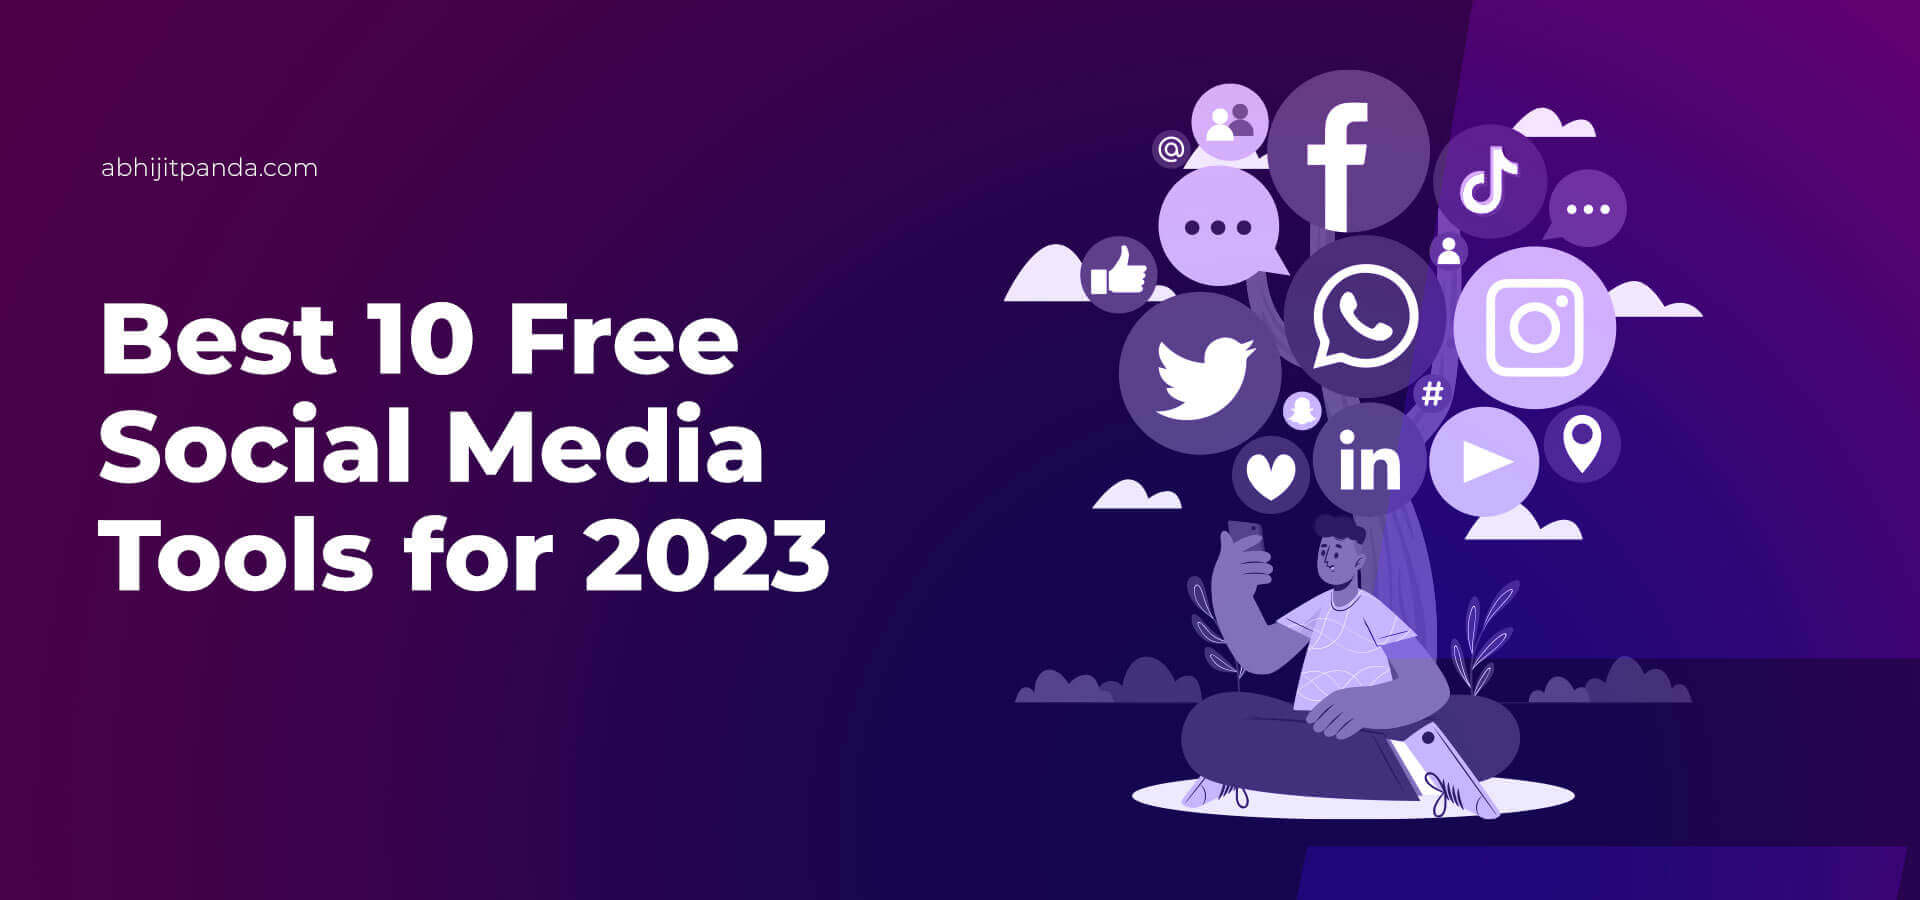 Best 11 Free Social Media Tools for 2023